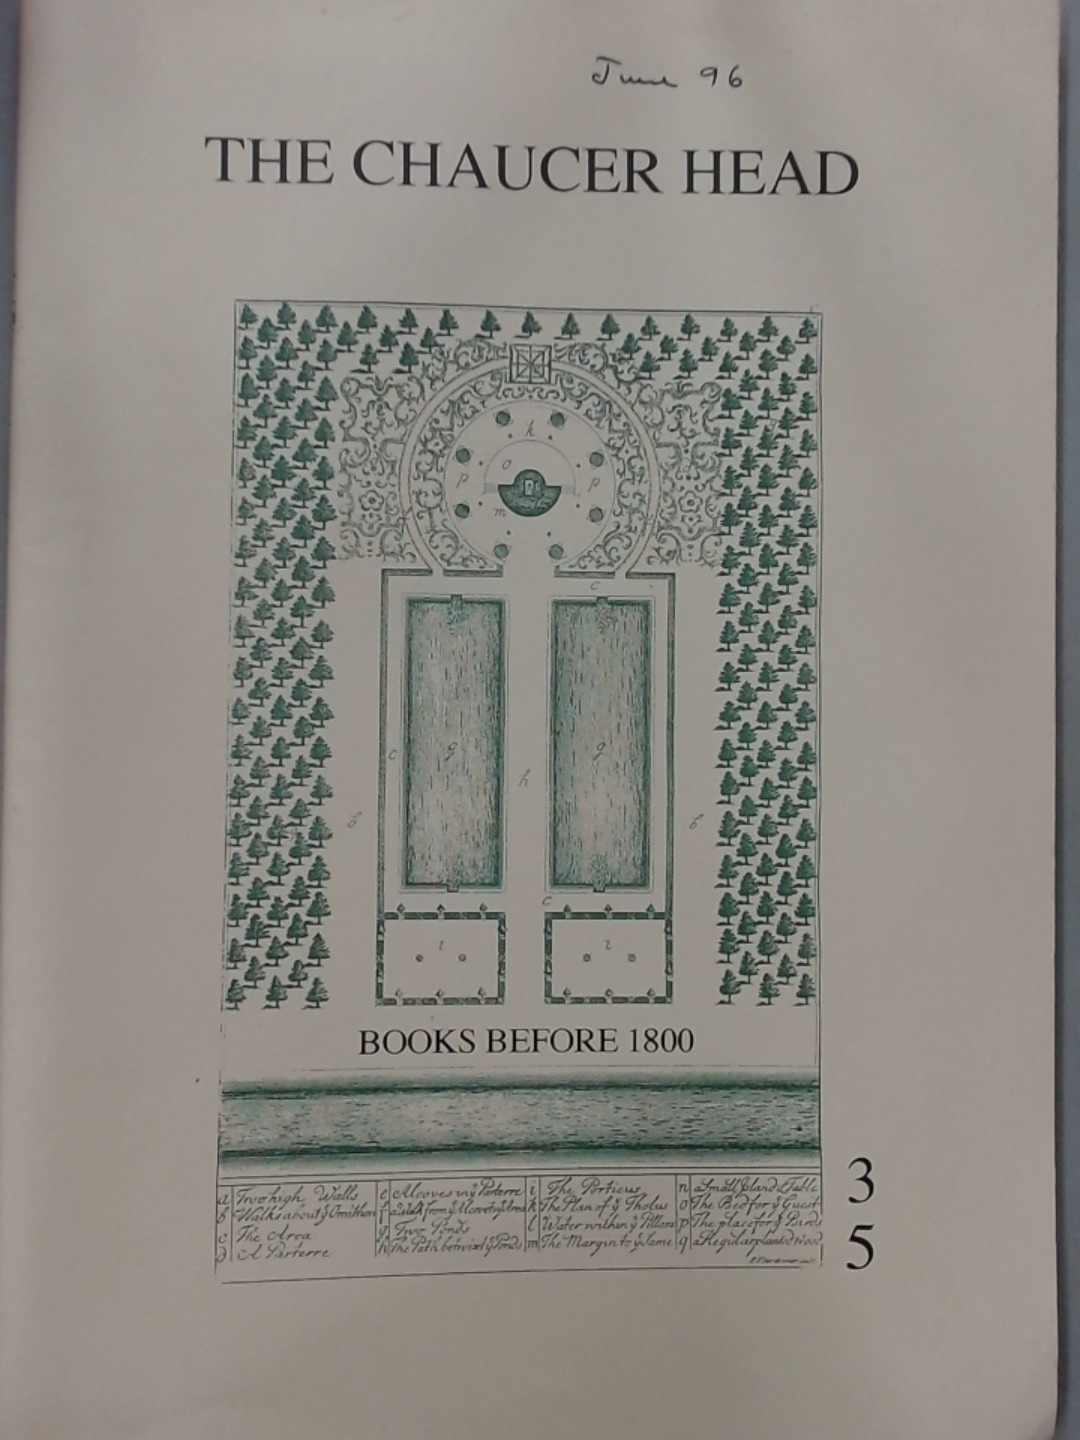 The Chaucer Head. Catalogue 35. Books before 1800.